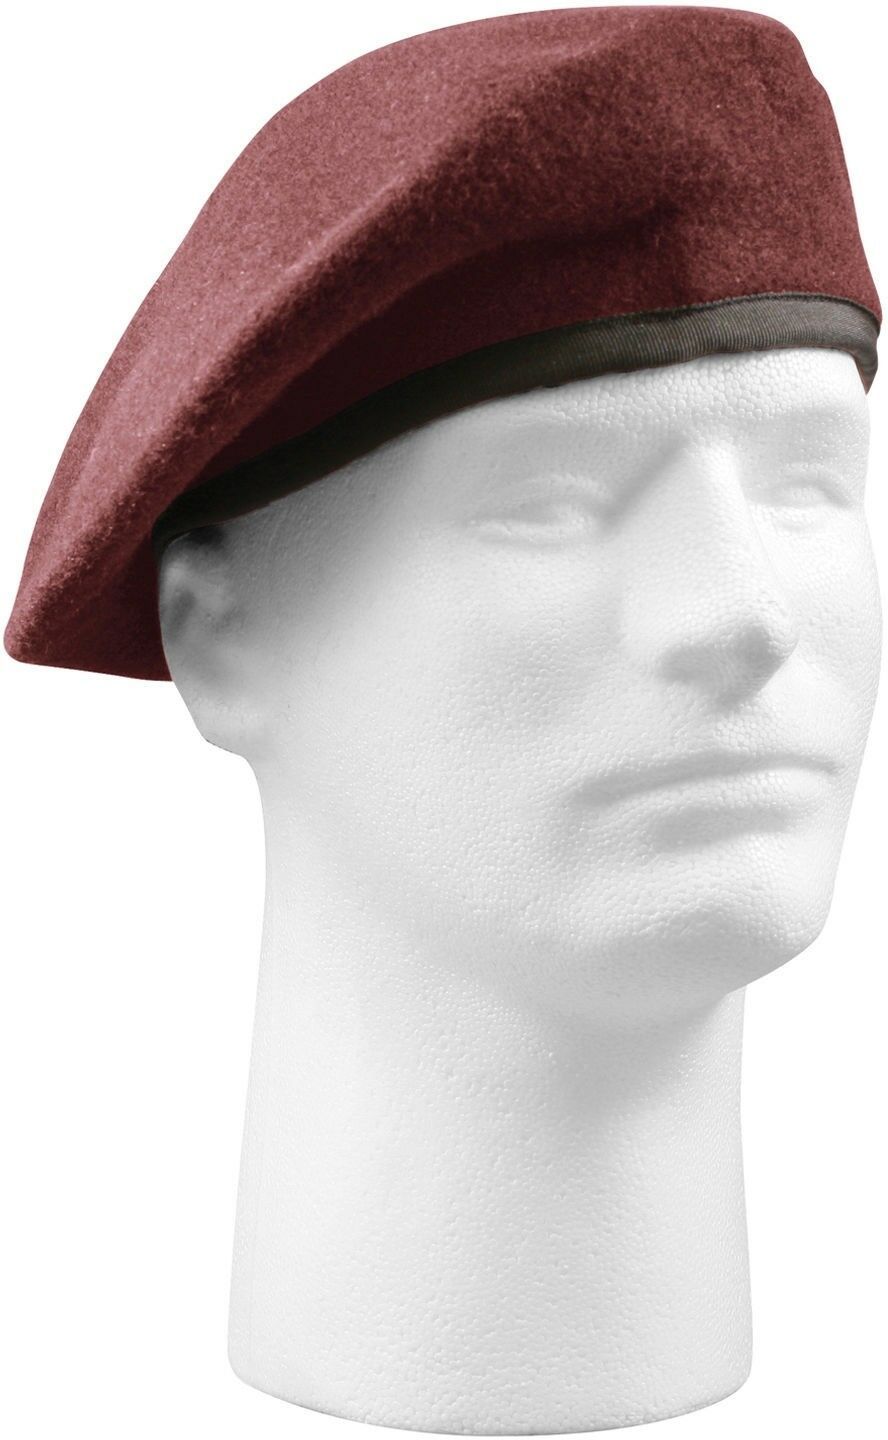 Military Wool Beret - Inspection Ready Pre-Shaved Badge Tactical US Army JROTC - Men's Accessories